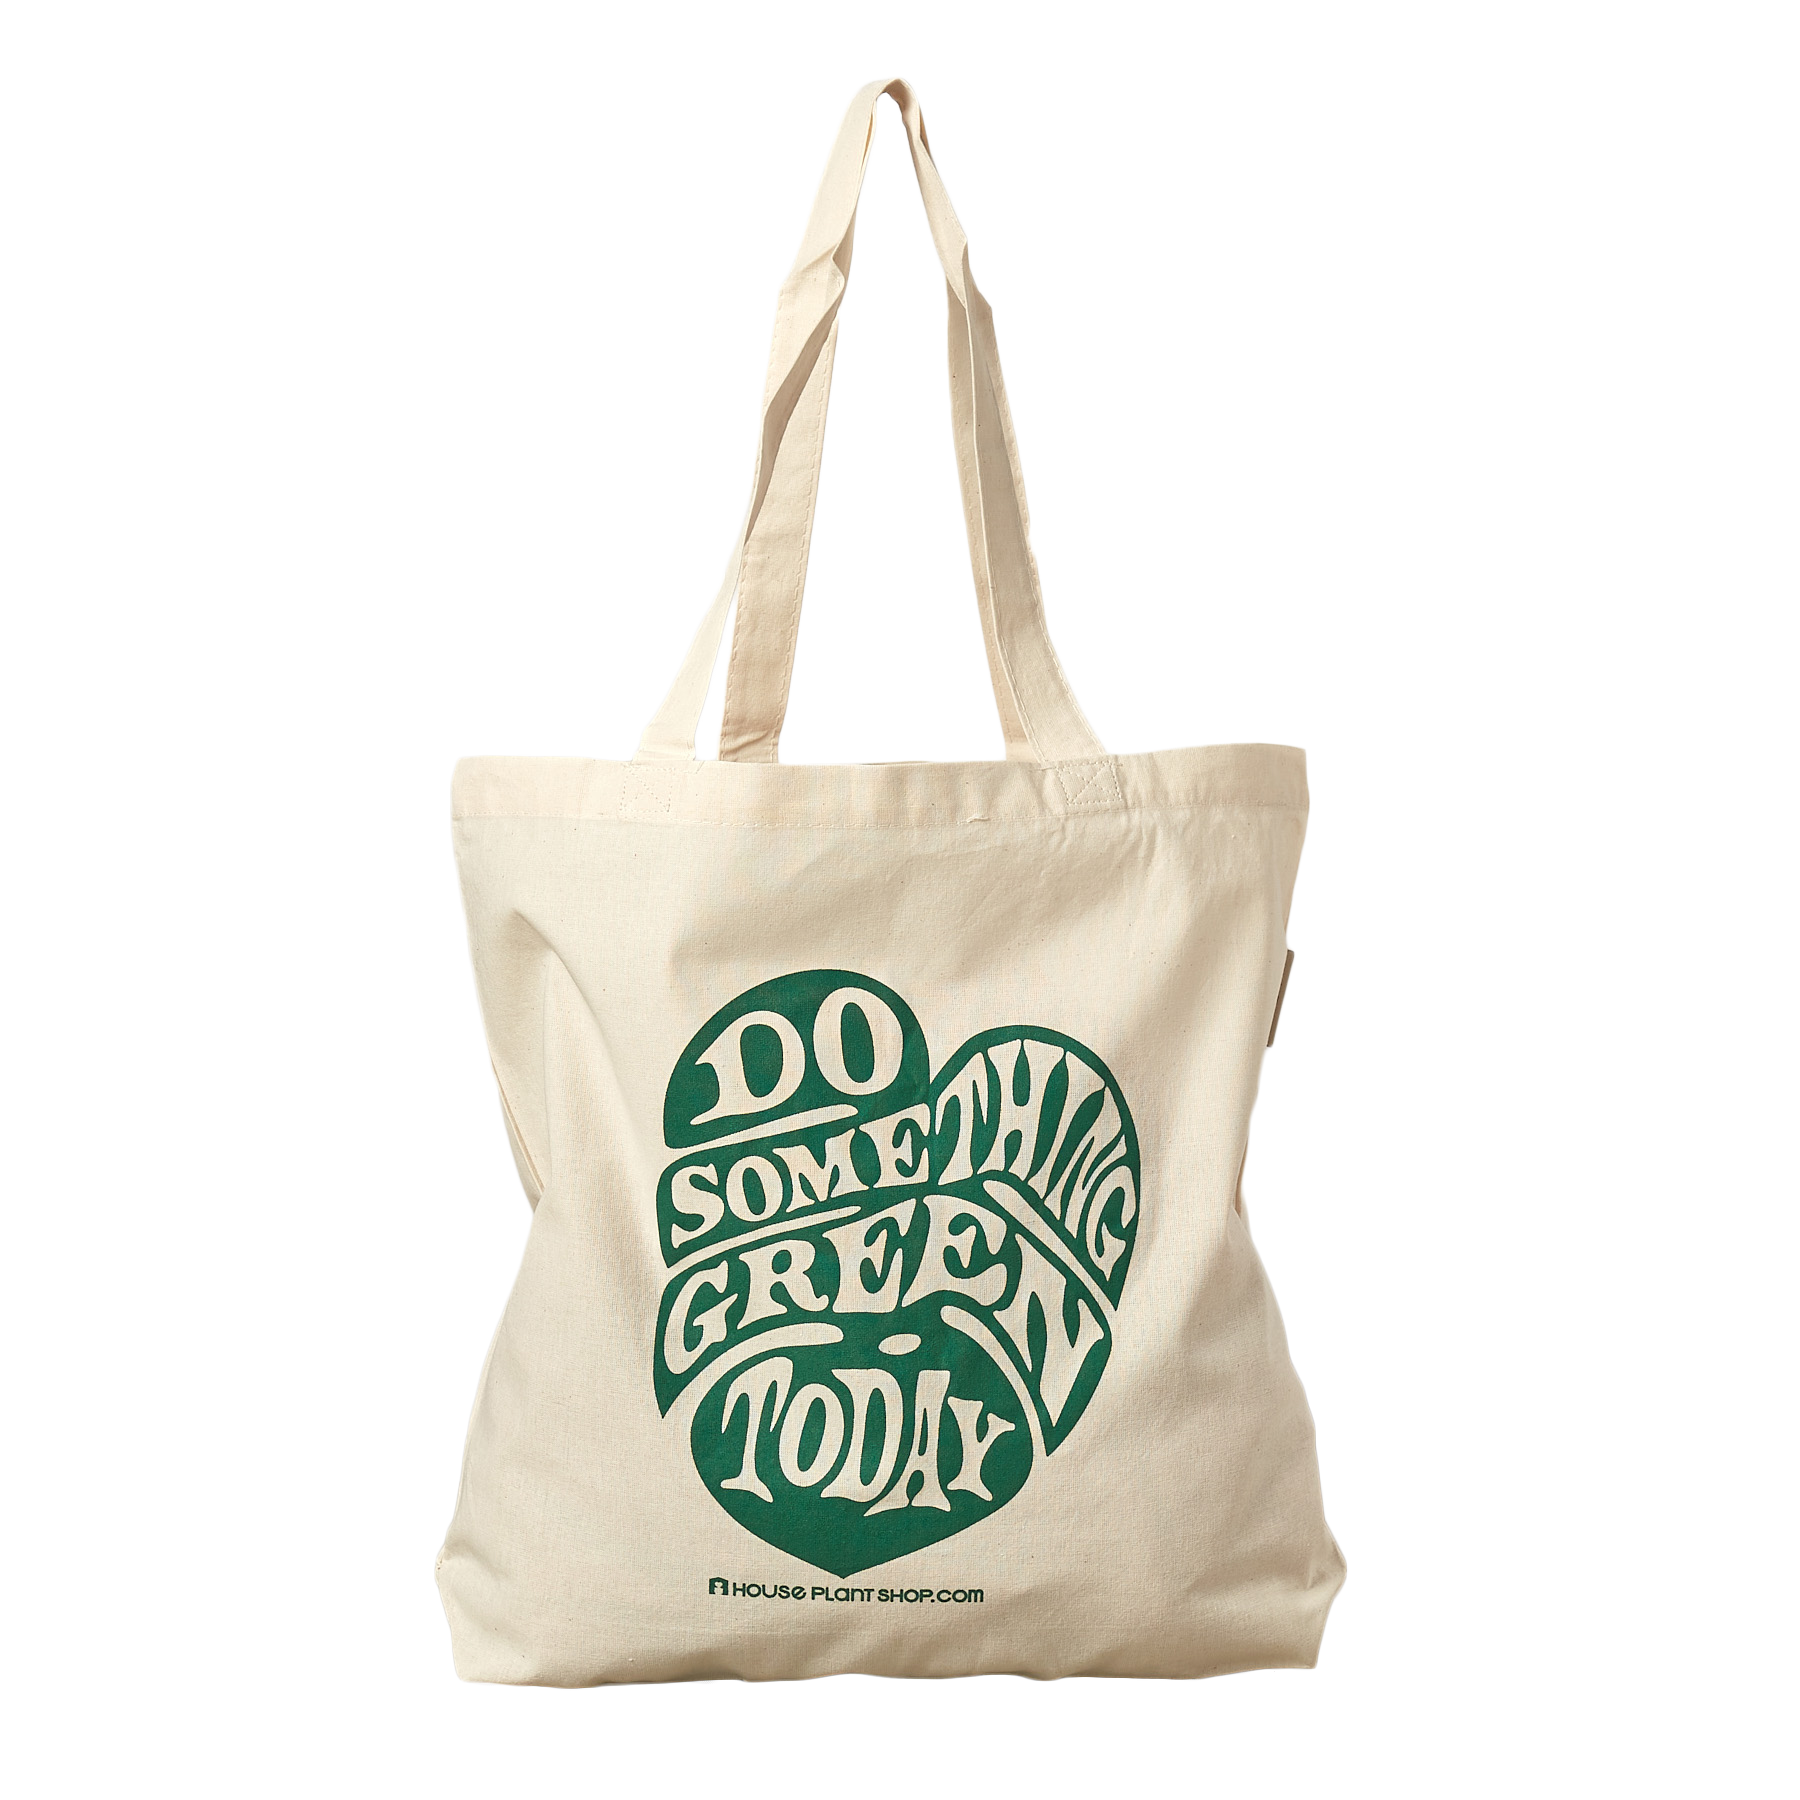 Discover the best garden nursery near me with our eco-friendly green tote bag.